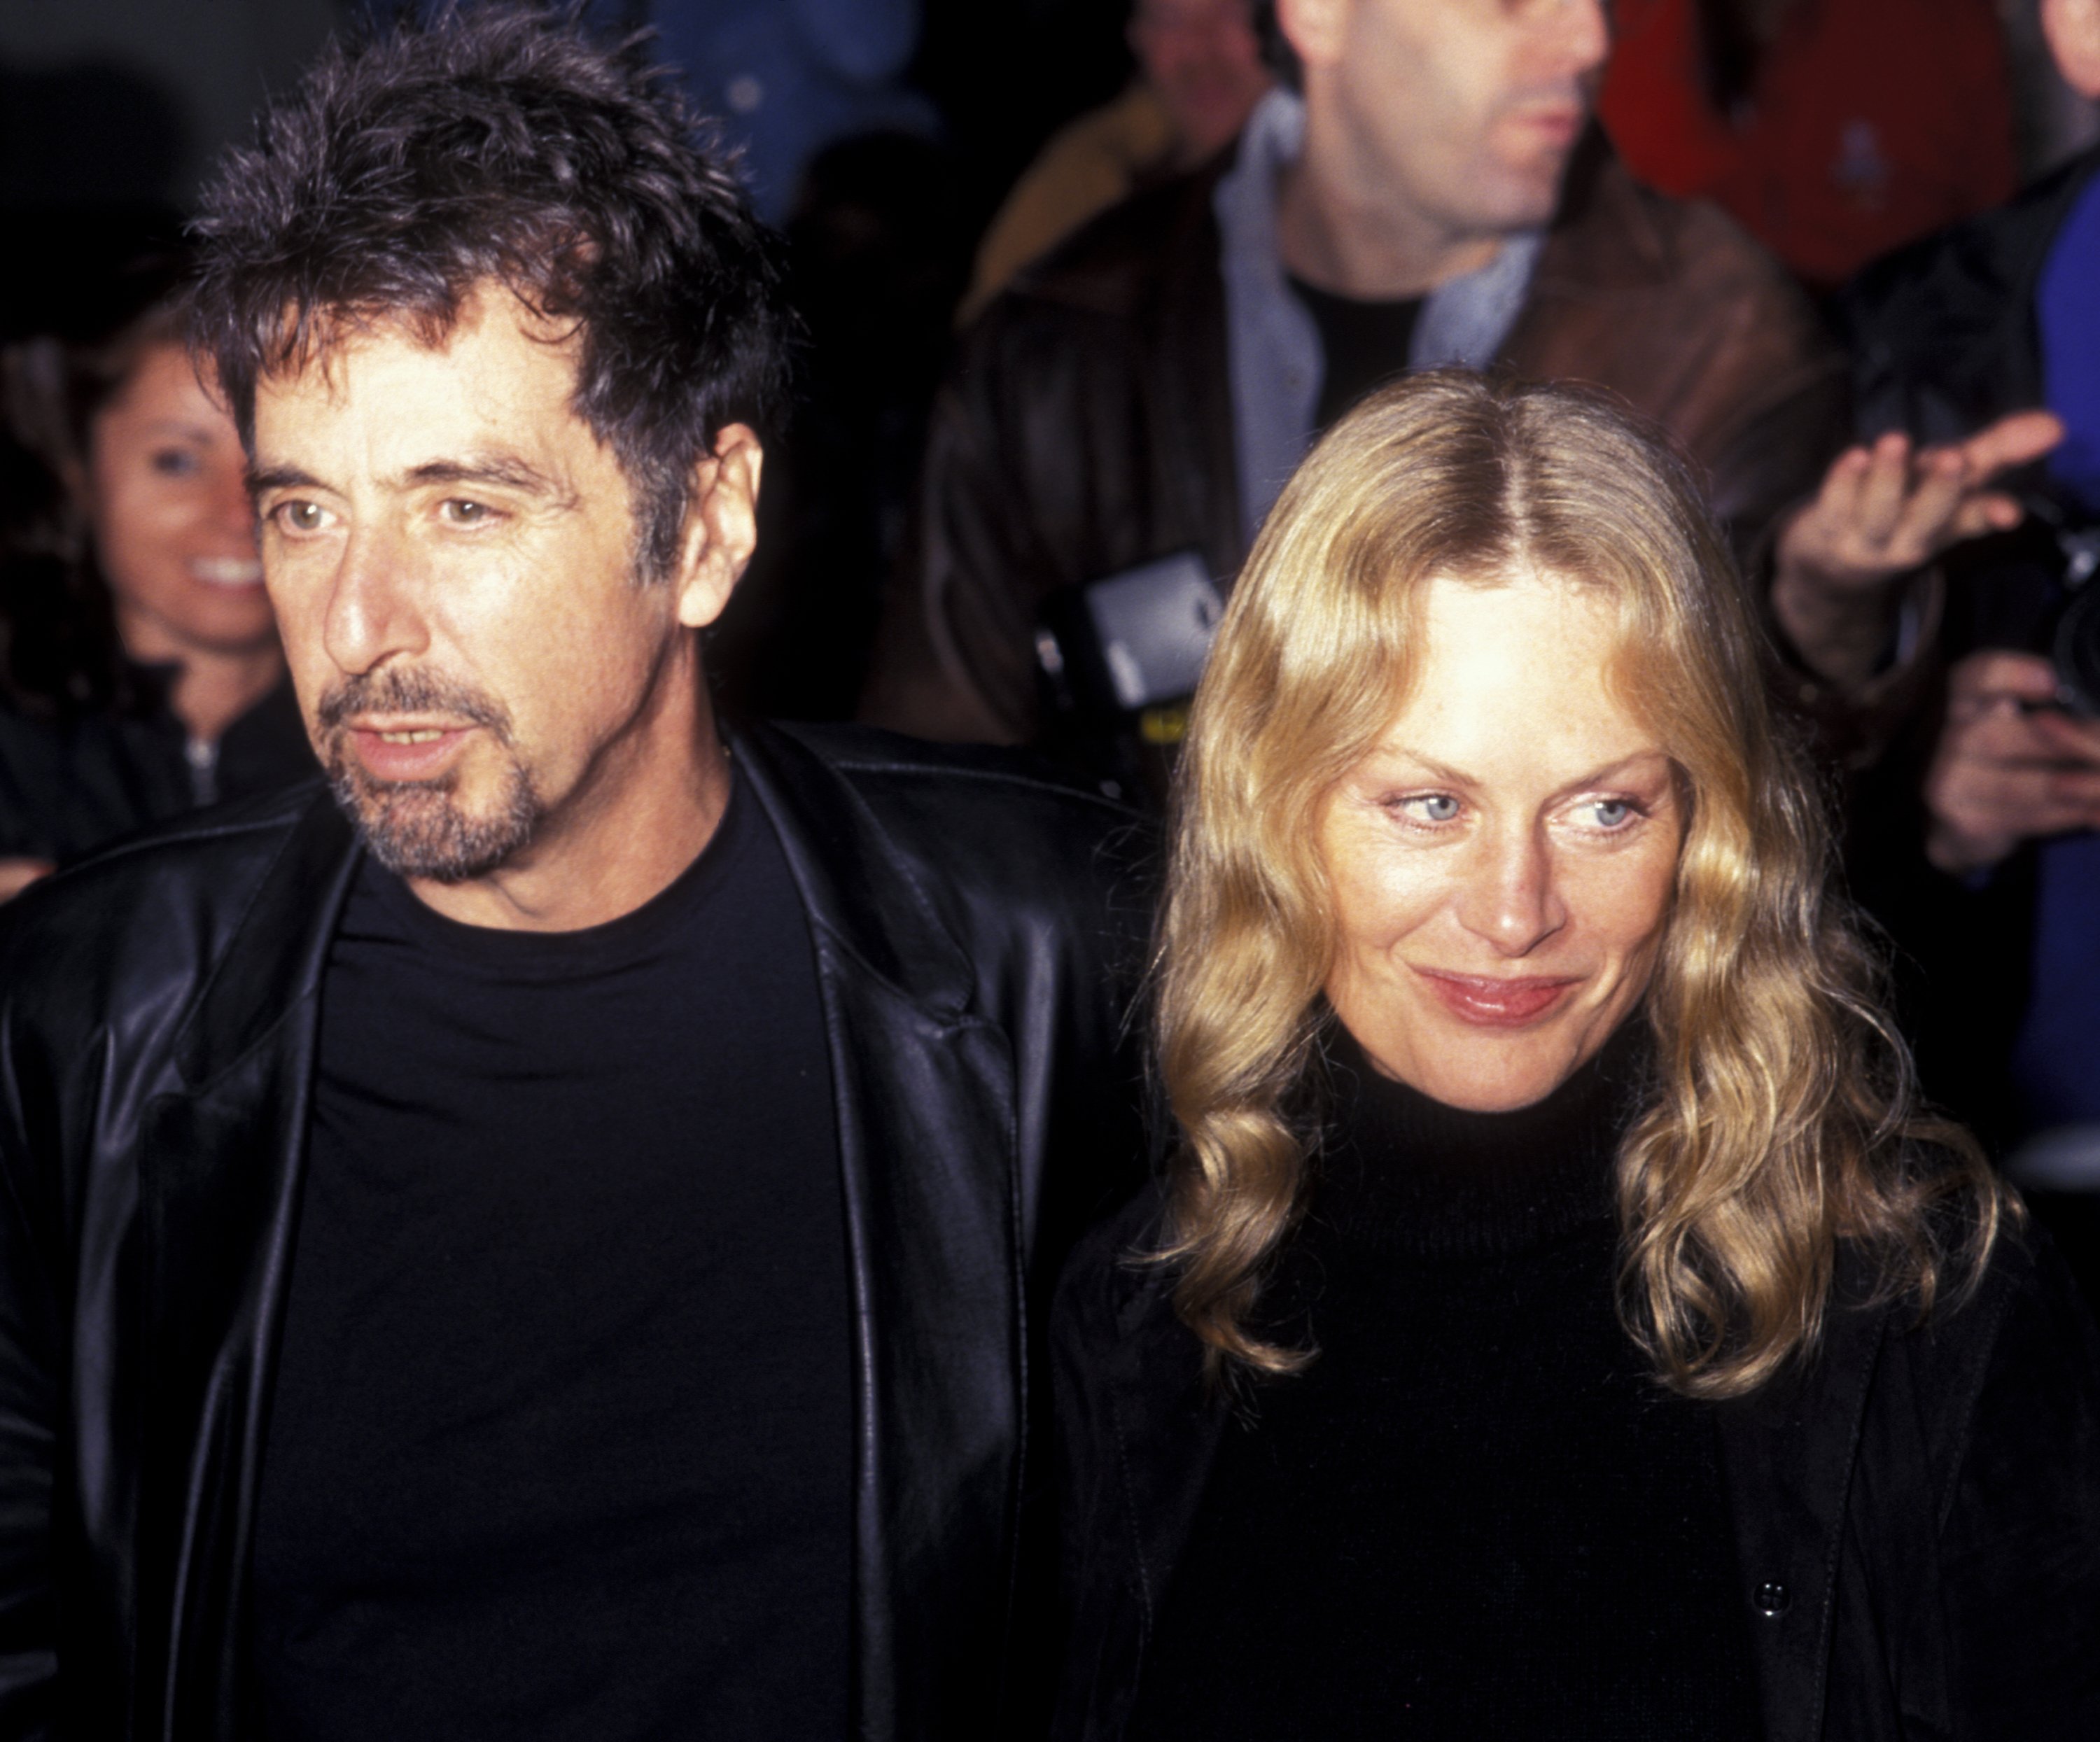 Al Pacino and Beverly D'Angelo attend "The Insider" film premiere party at the Ziegfeld Theater, on November 1, 1999 , in New York City. | Source: Getty Images